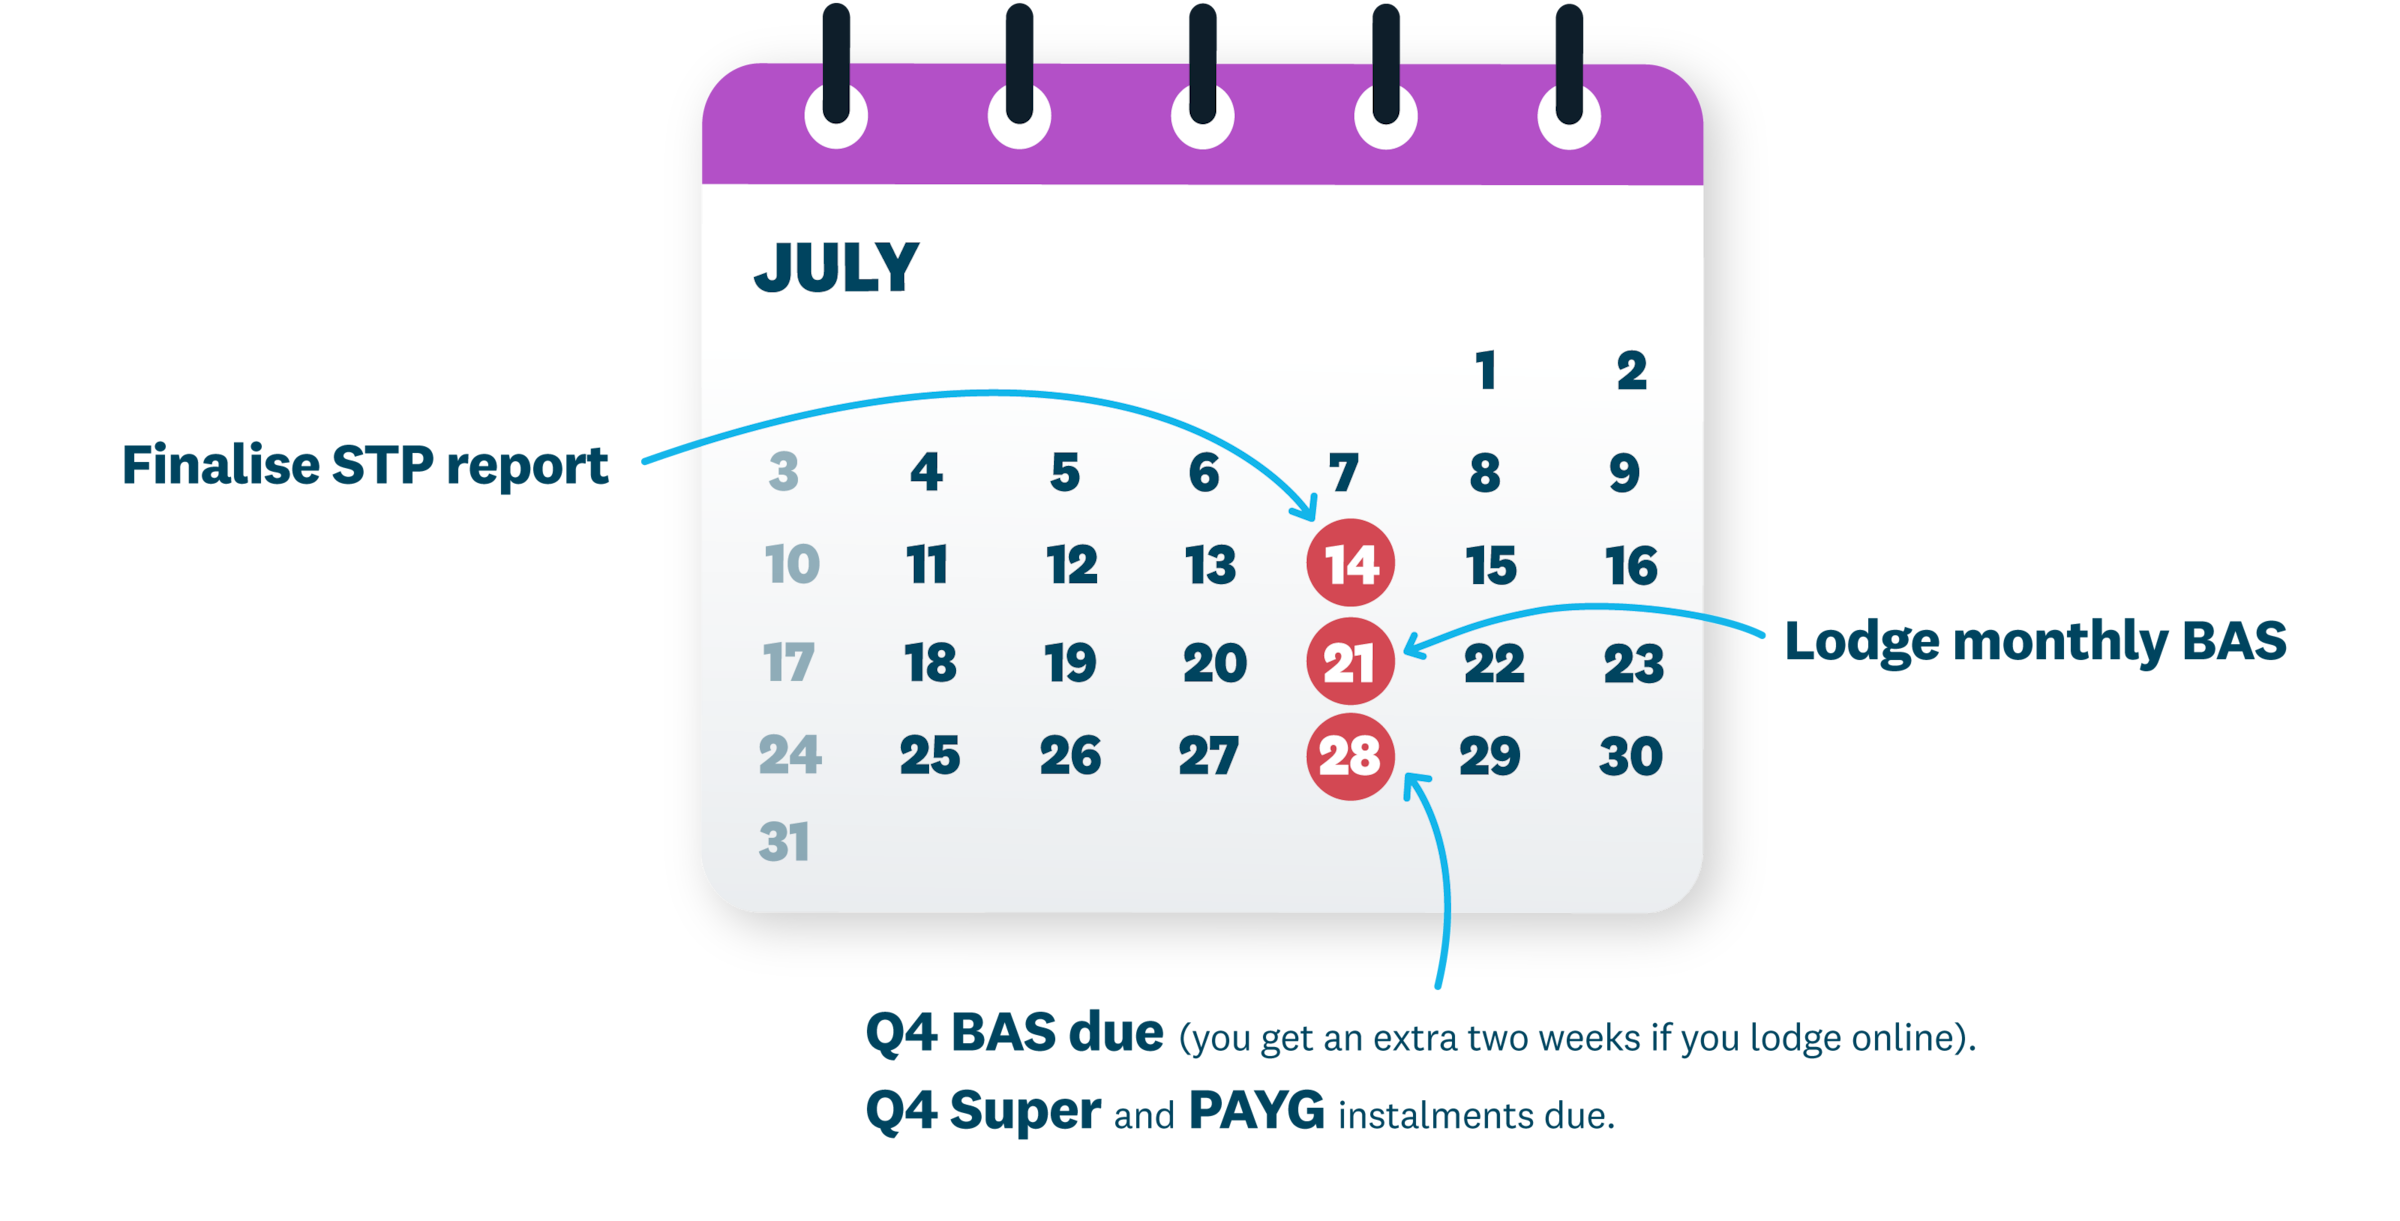 A calendar showing key dates in July. An overview is in the description below.